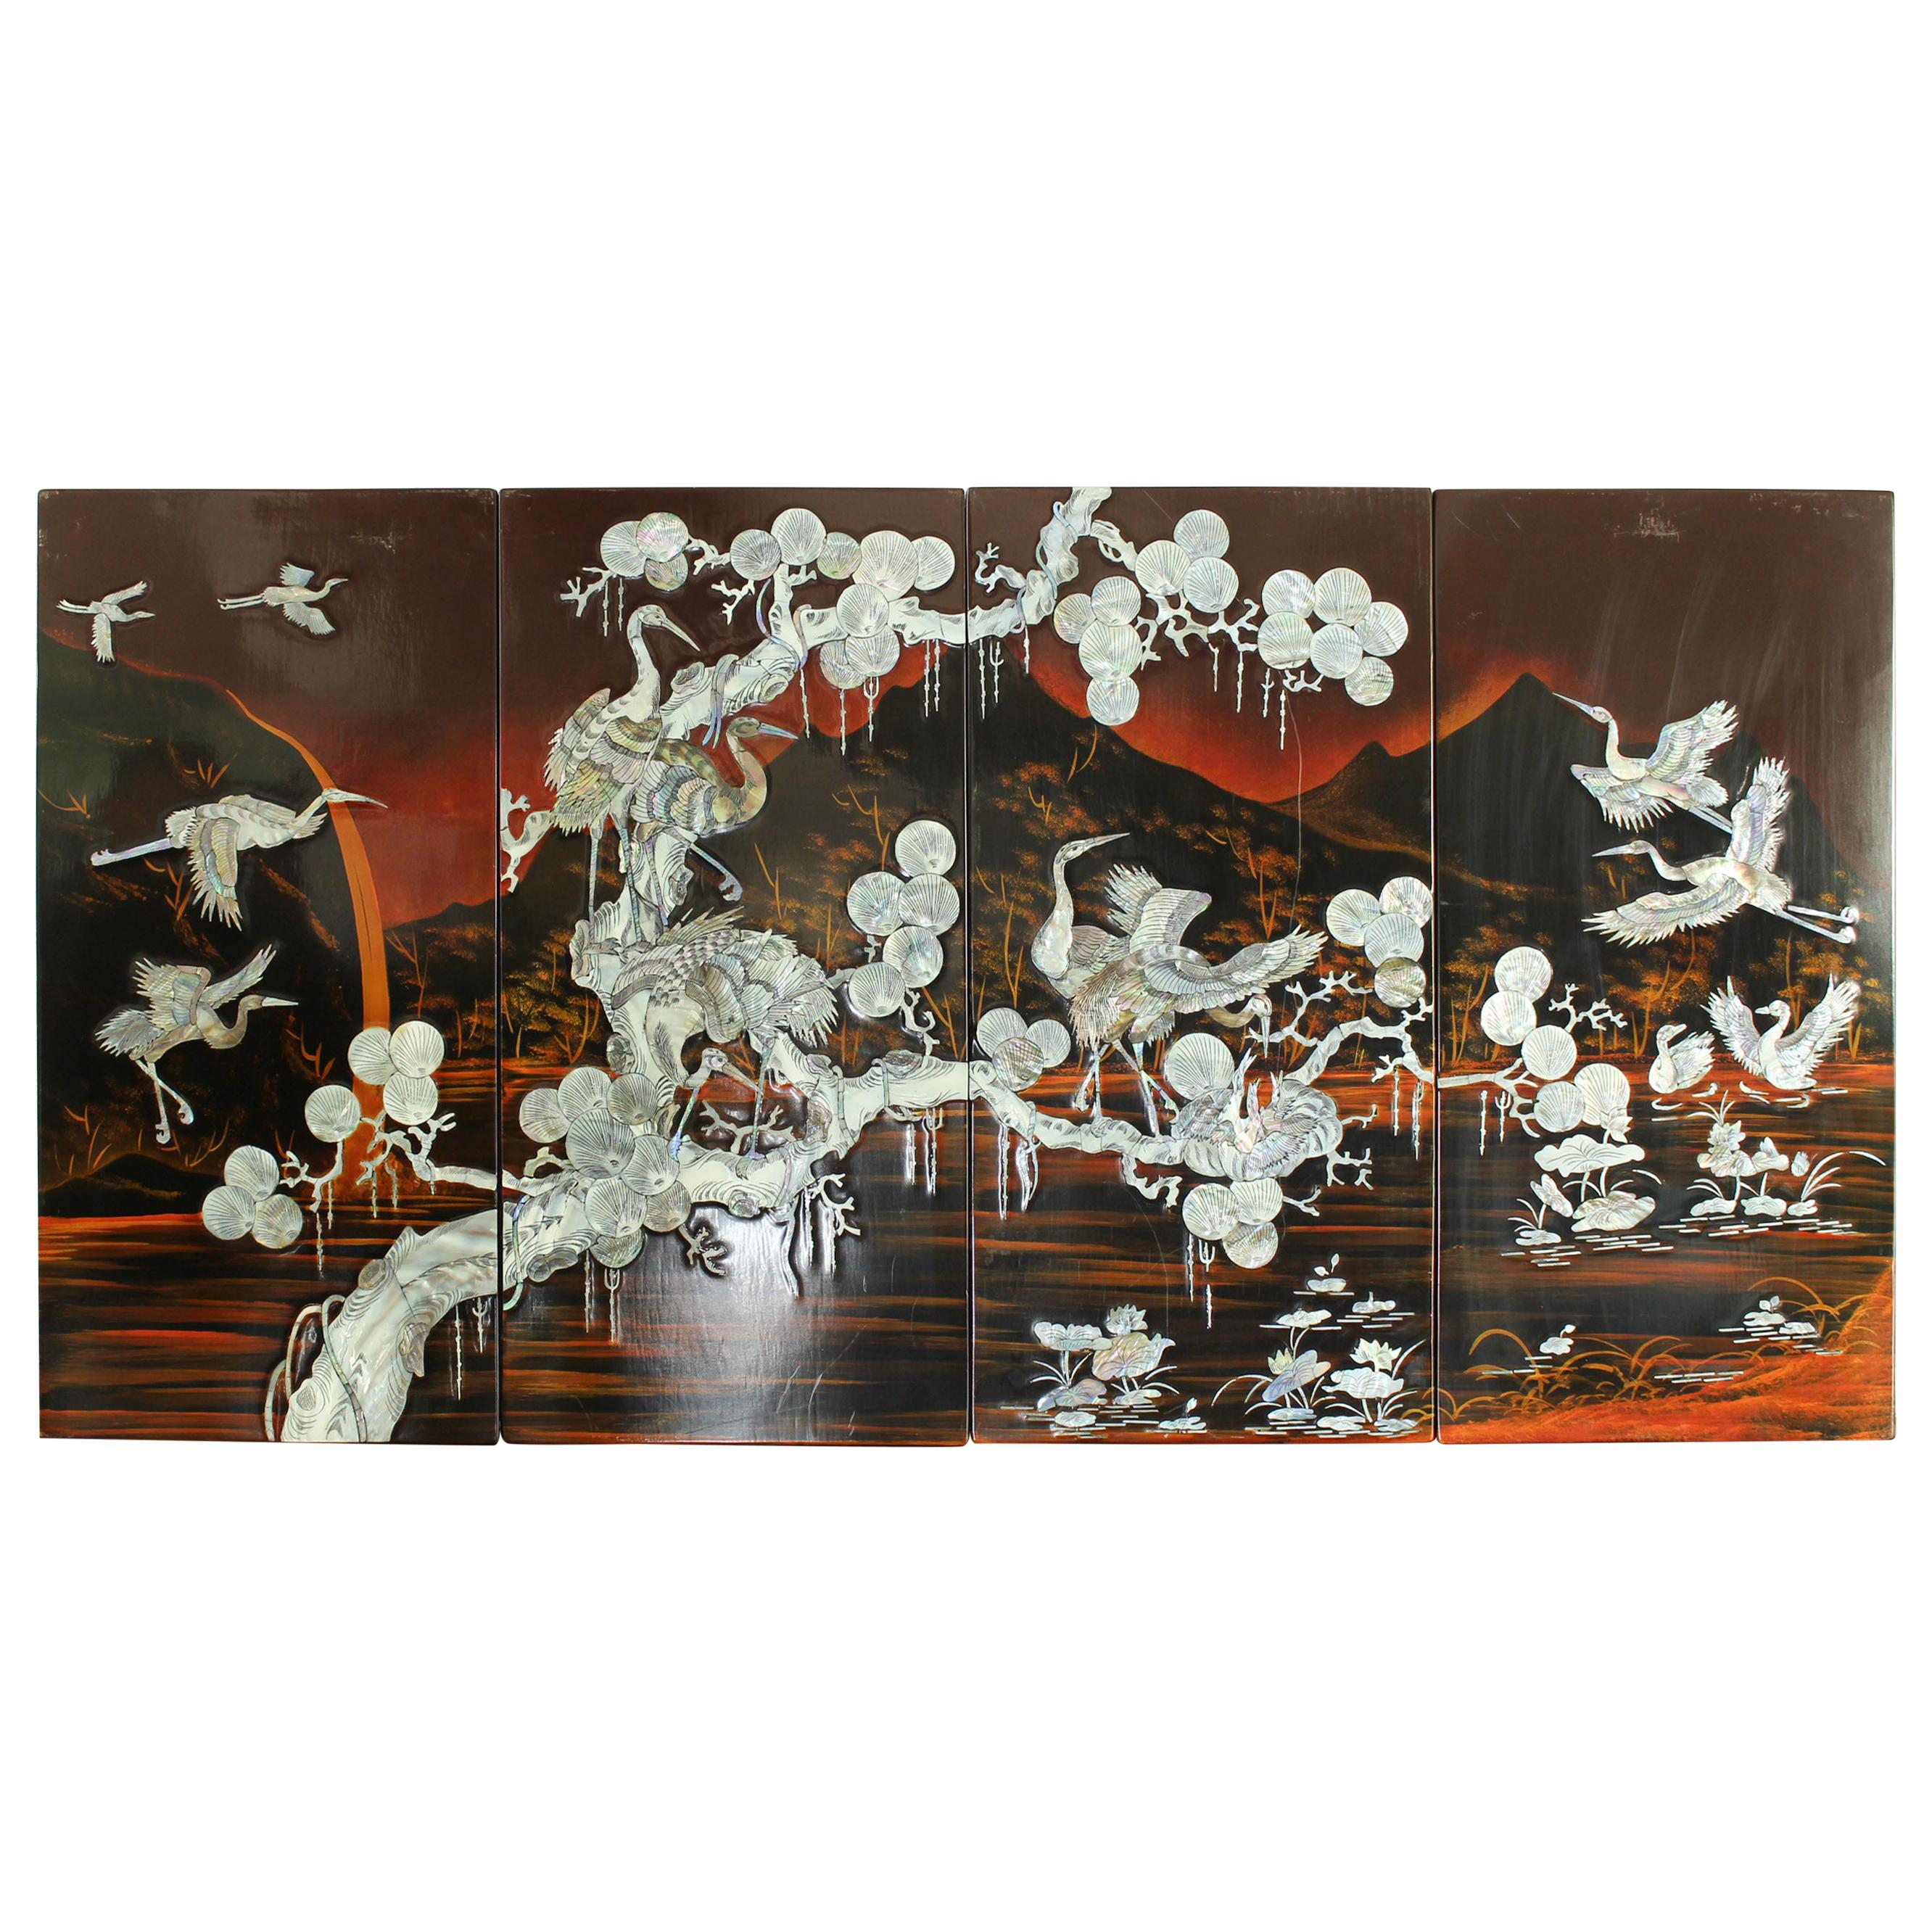 Oriental Midcentury Wall Art Panels Made of Mother of Pearl